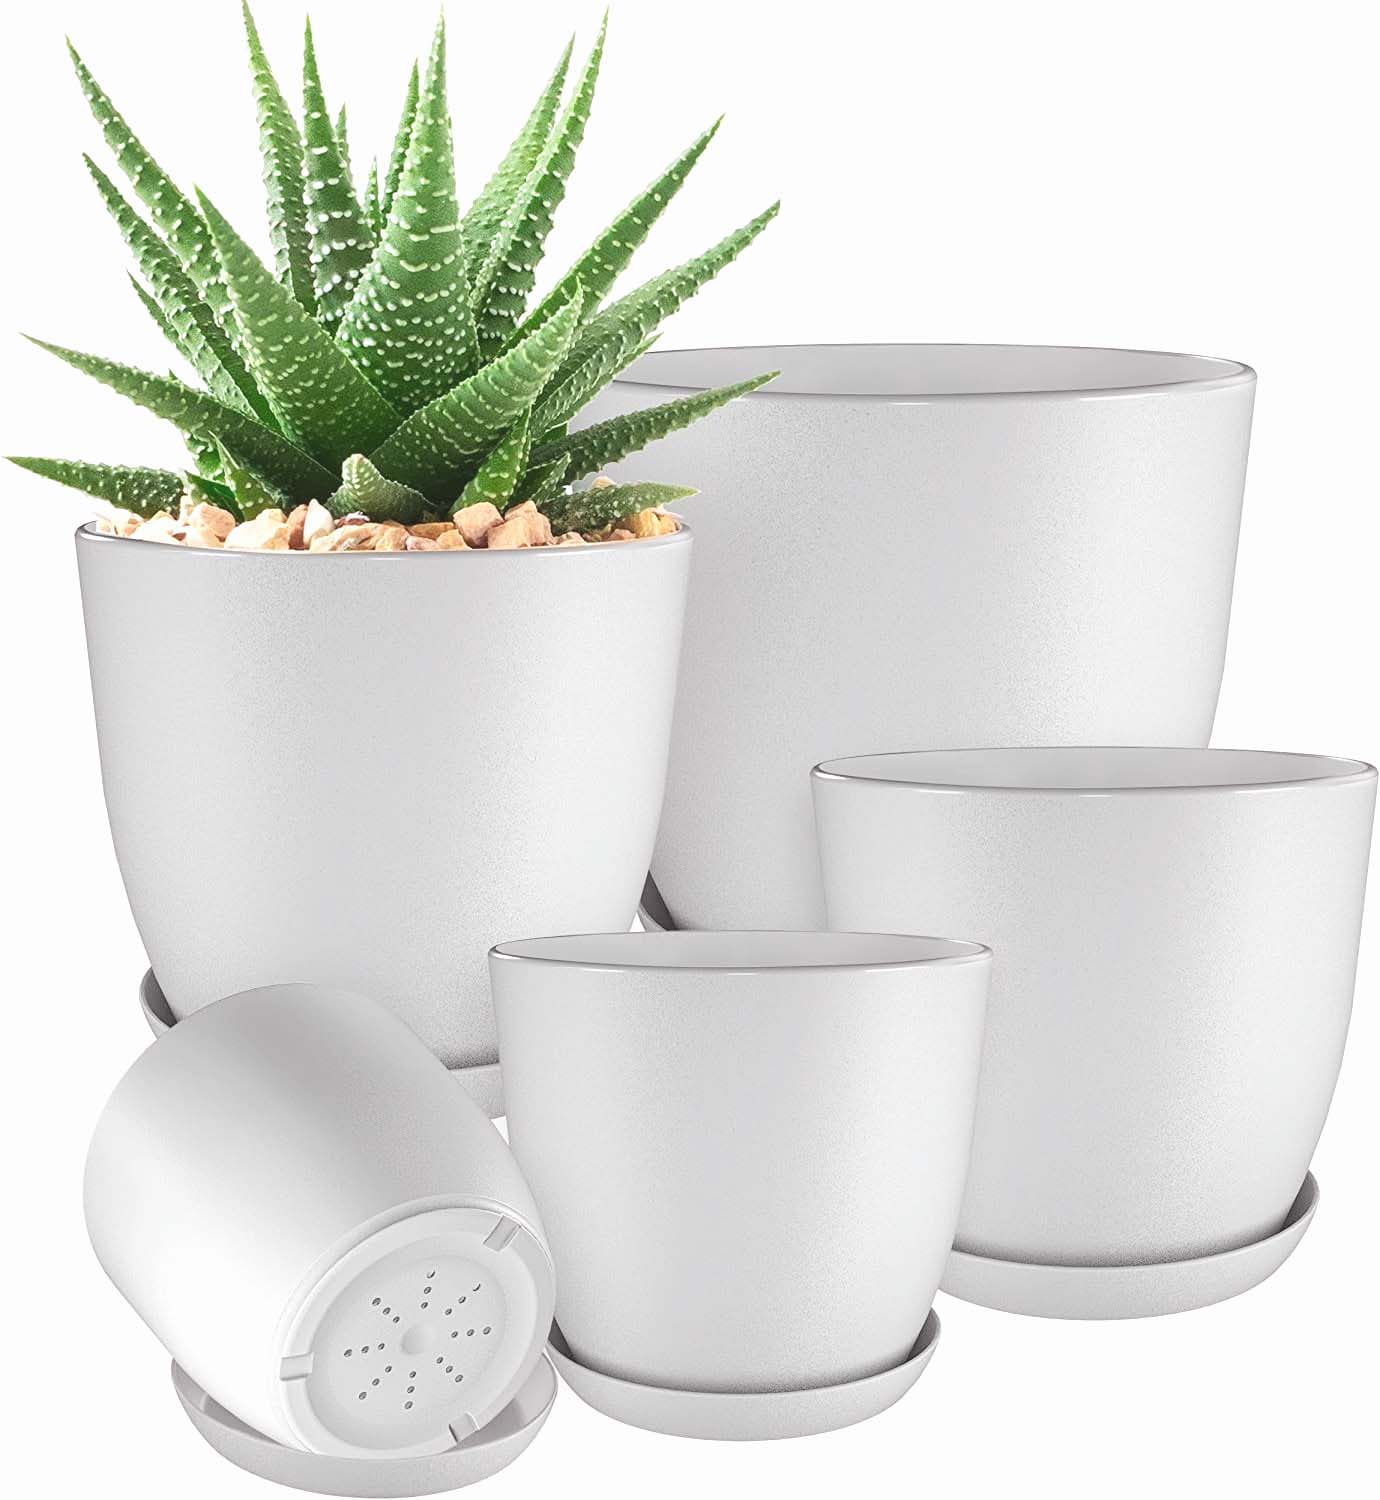 table plant pots, plants for office table